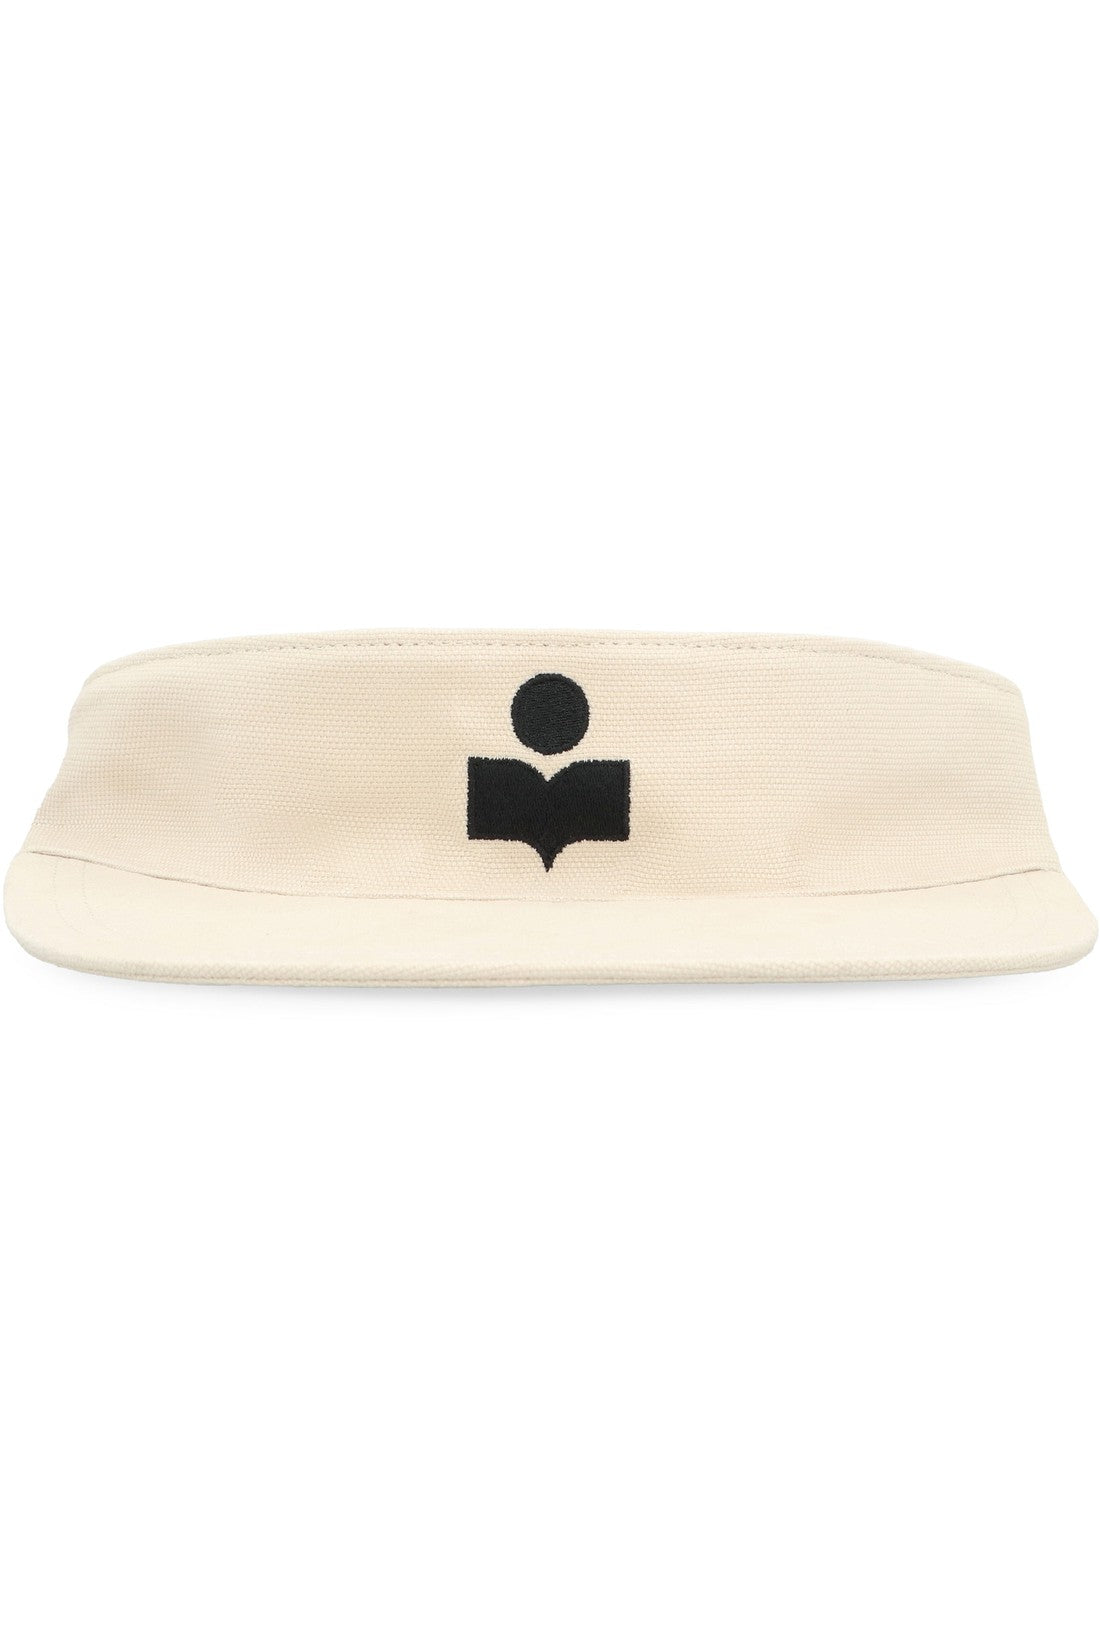 Isabel Marant-OUTLET-SALE-Tyry Cotton visor with logo-ARCHIVIST